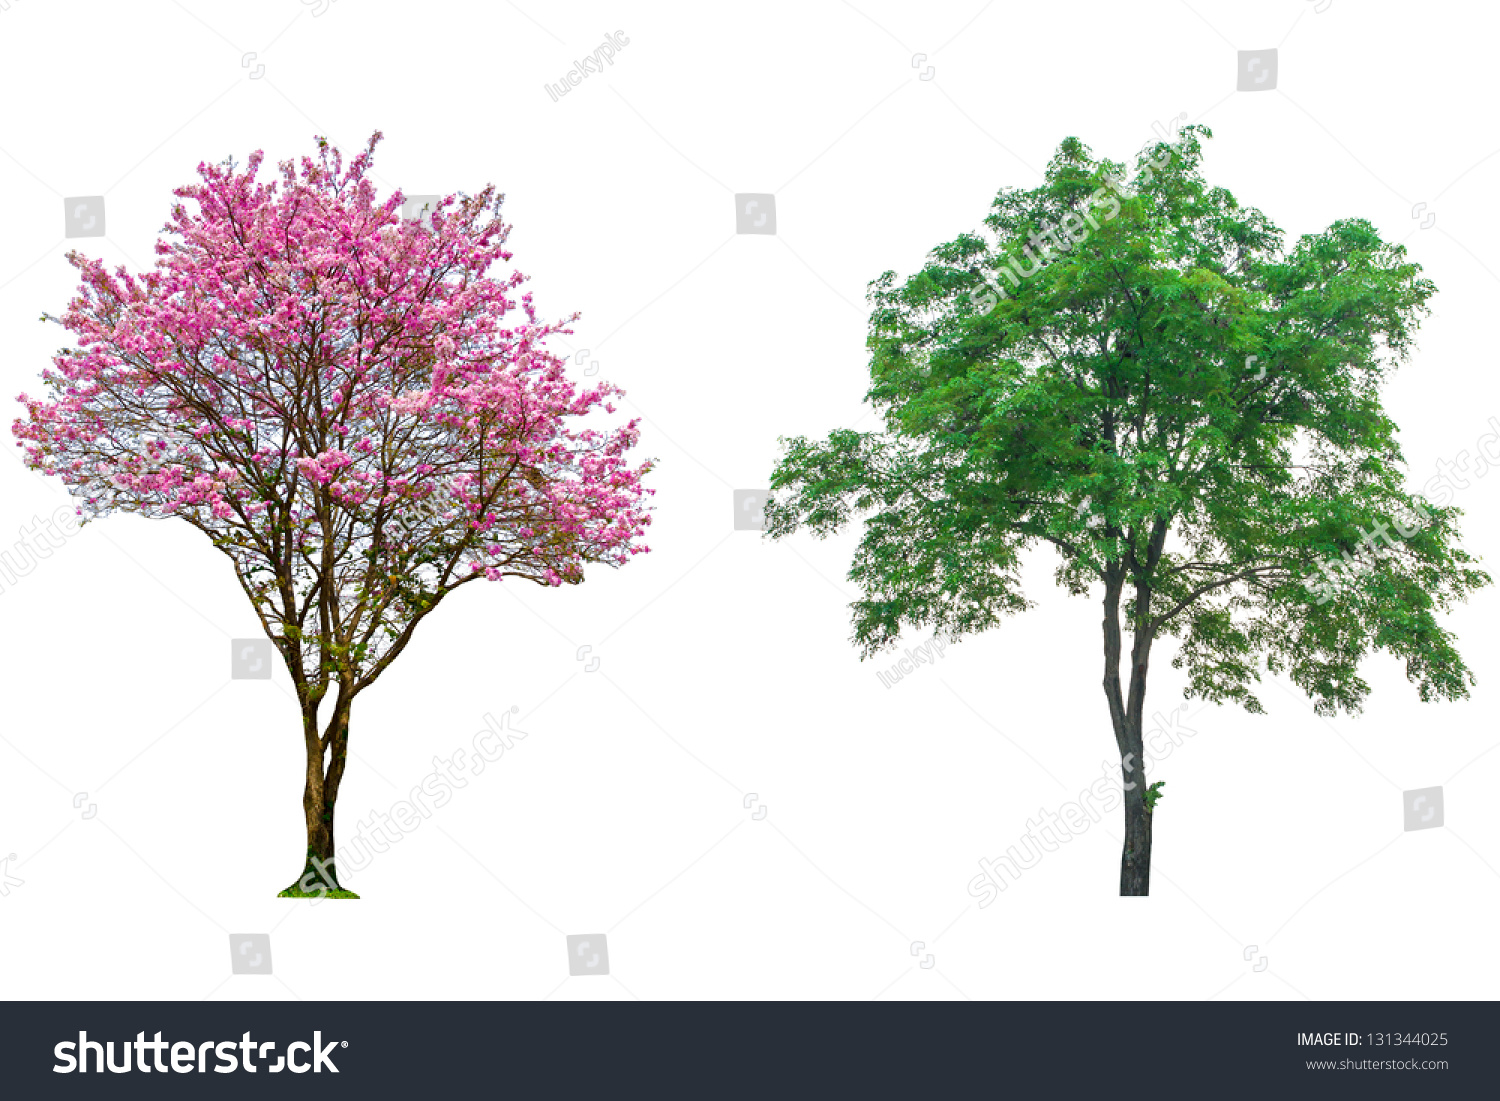 Pink Flower Tree Isolated On White Stock Photo 131344025 - Shutterstock